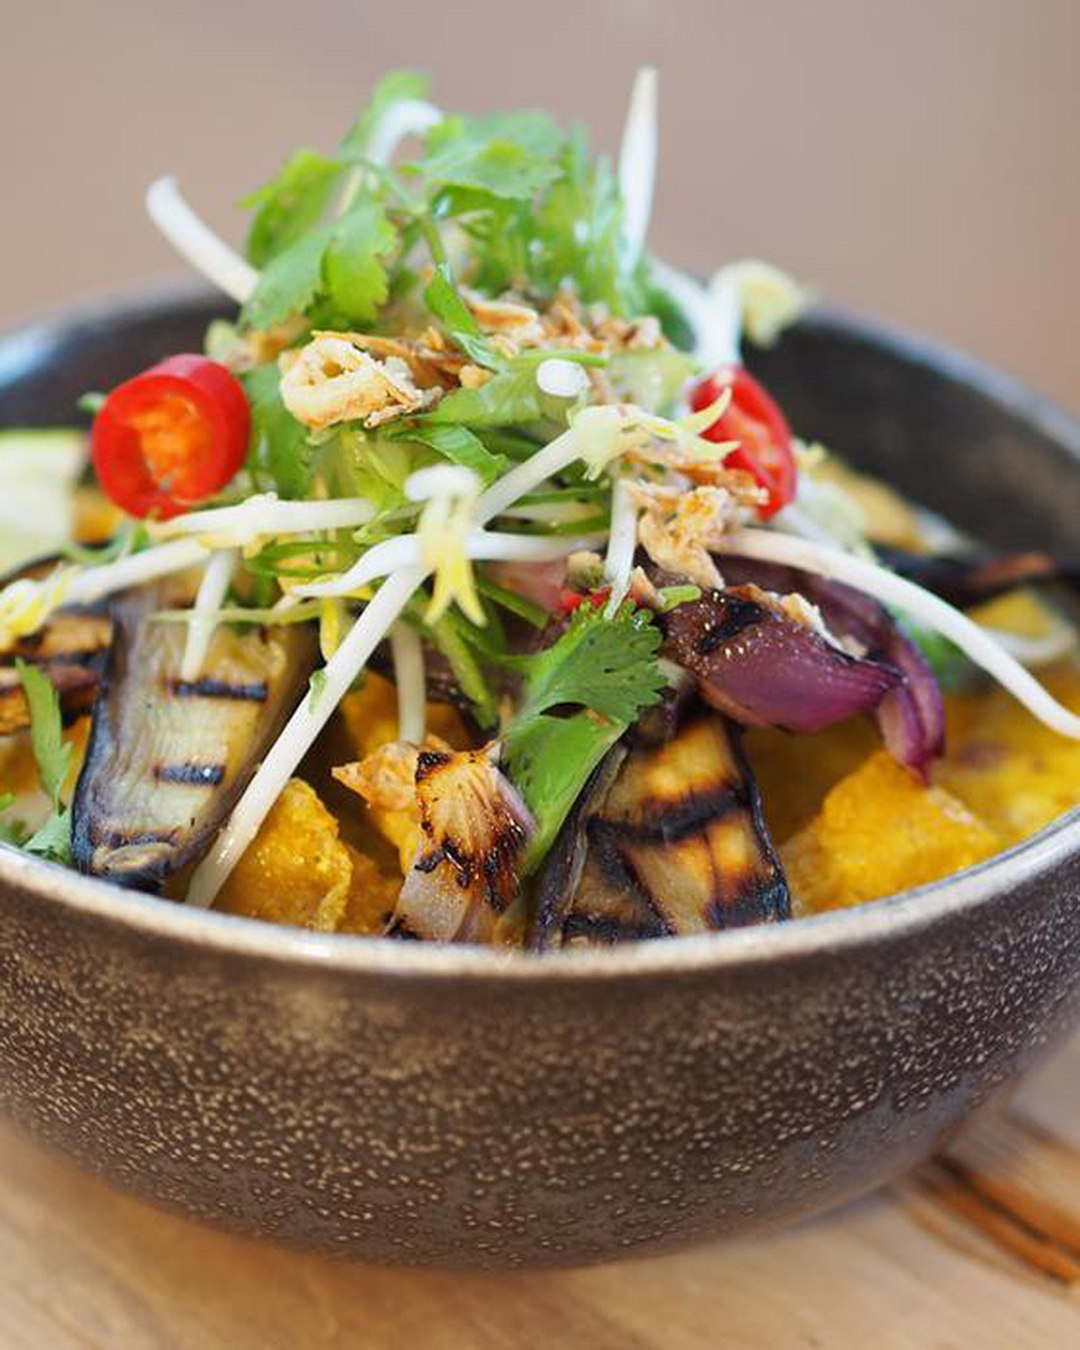 Delicious bowl of healthy looking food with greens and grilled aubergine.